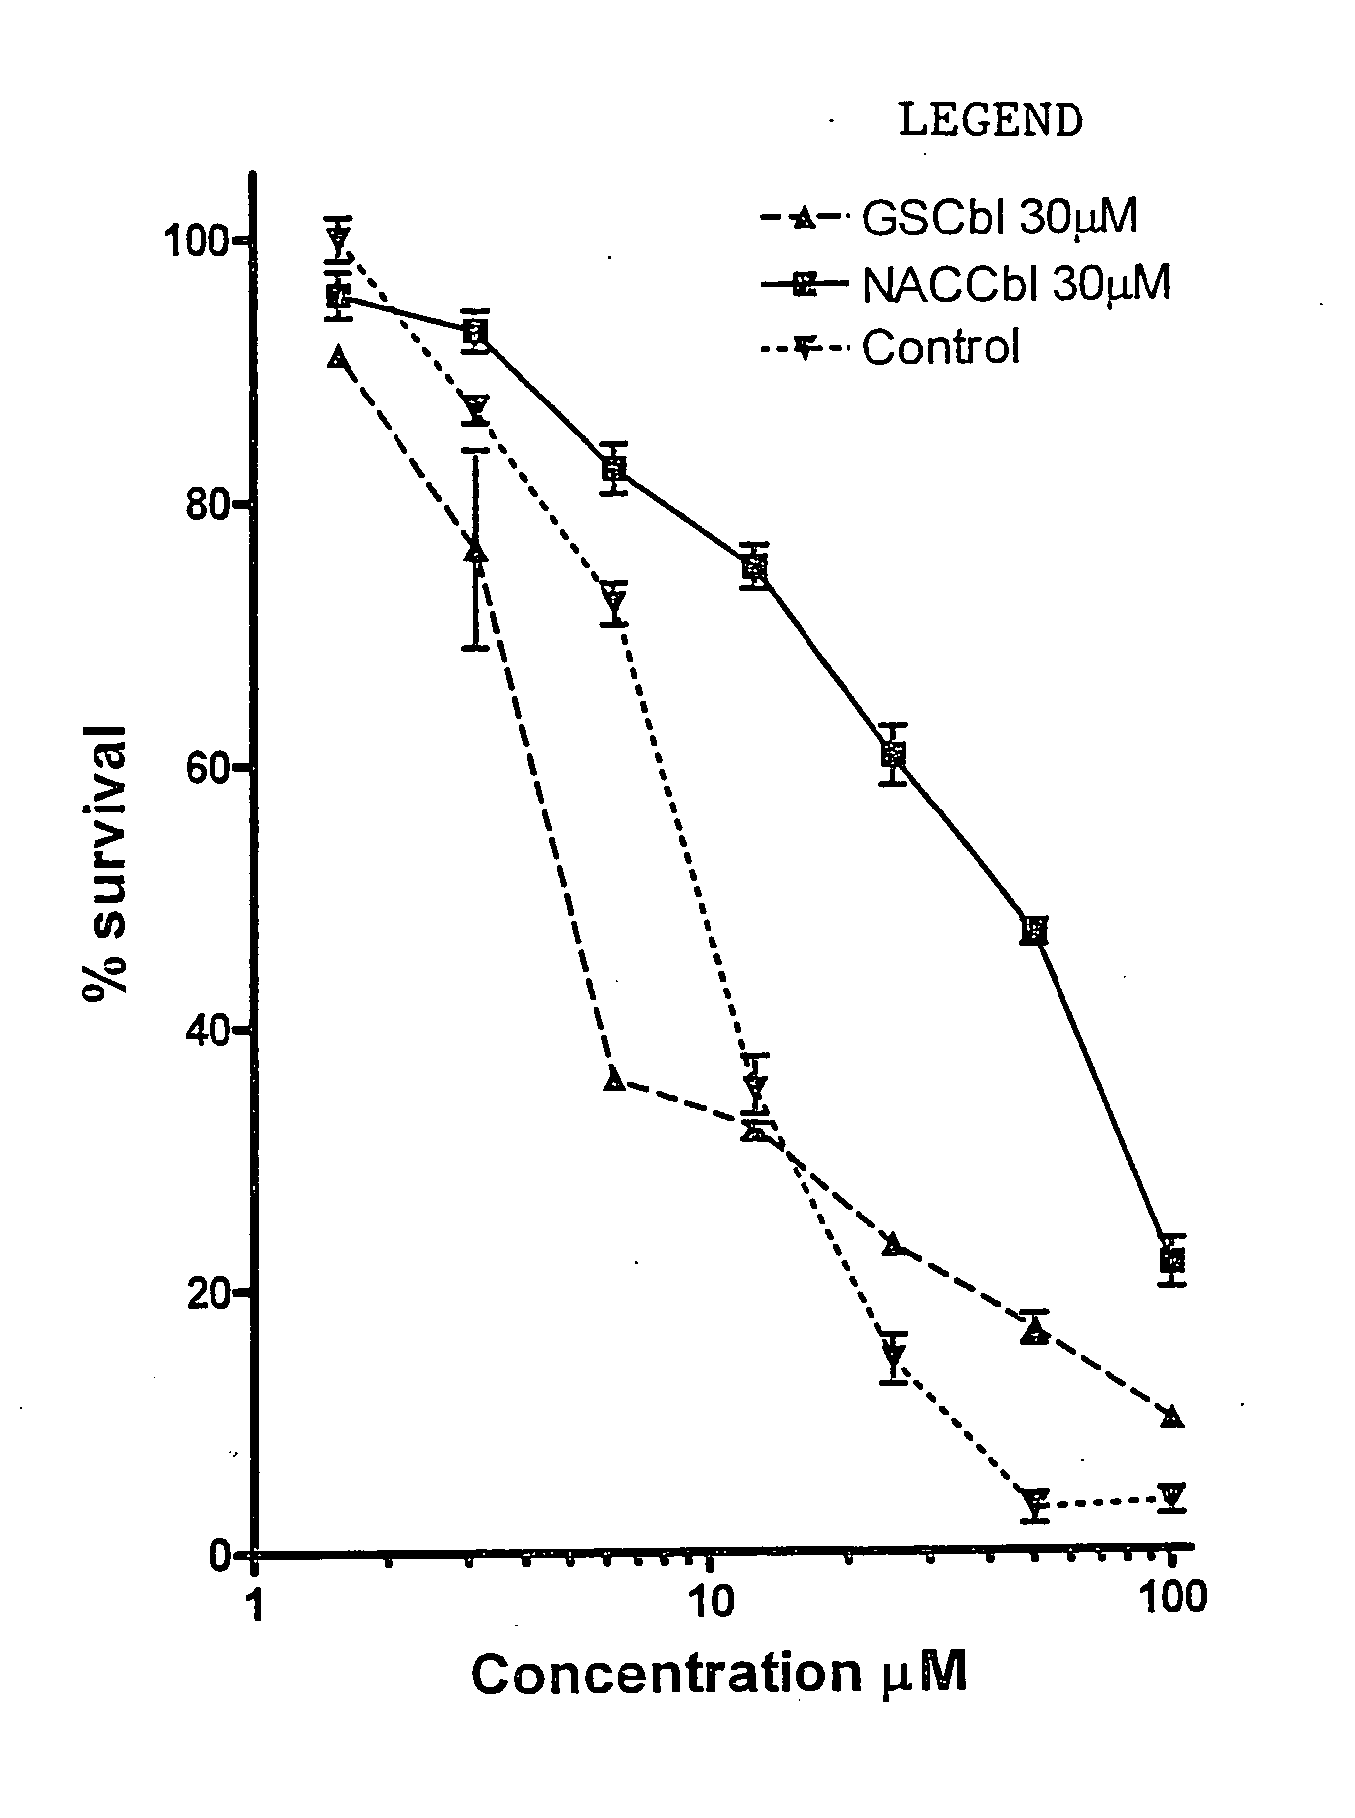 Pharmaceutical compositions and therapeutic applications for the use of a novel vitamin B12 derivative, N-acetyl-L-cysteinylcobalamin